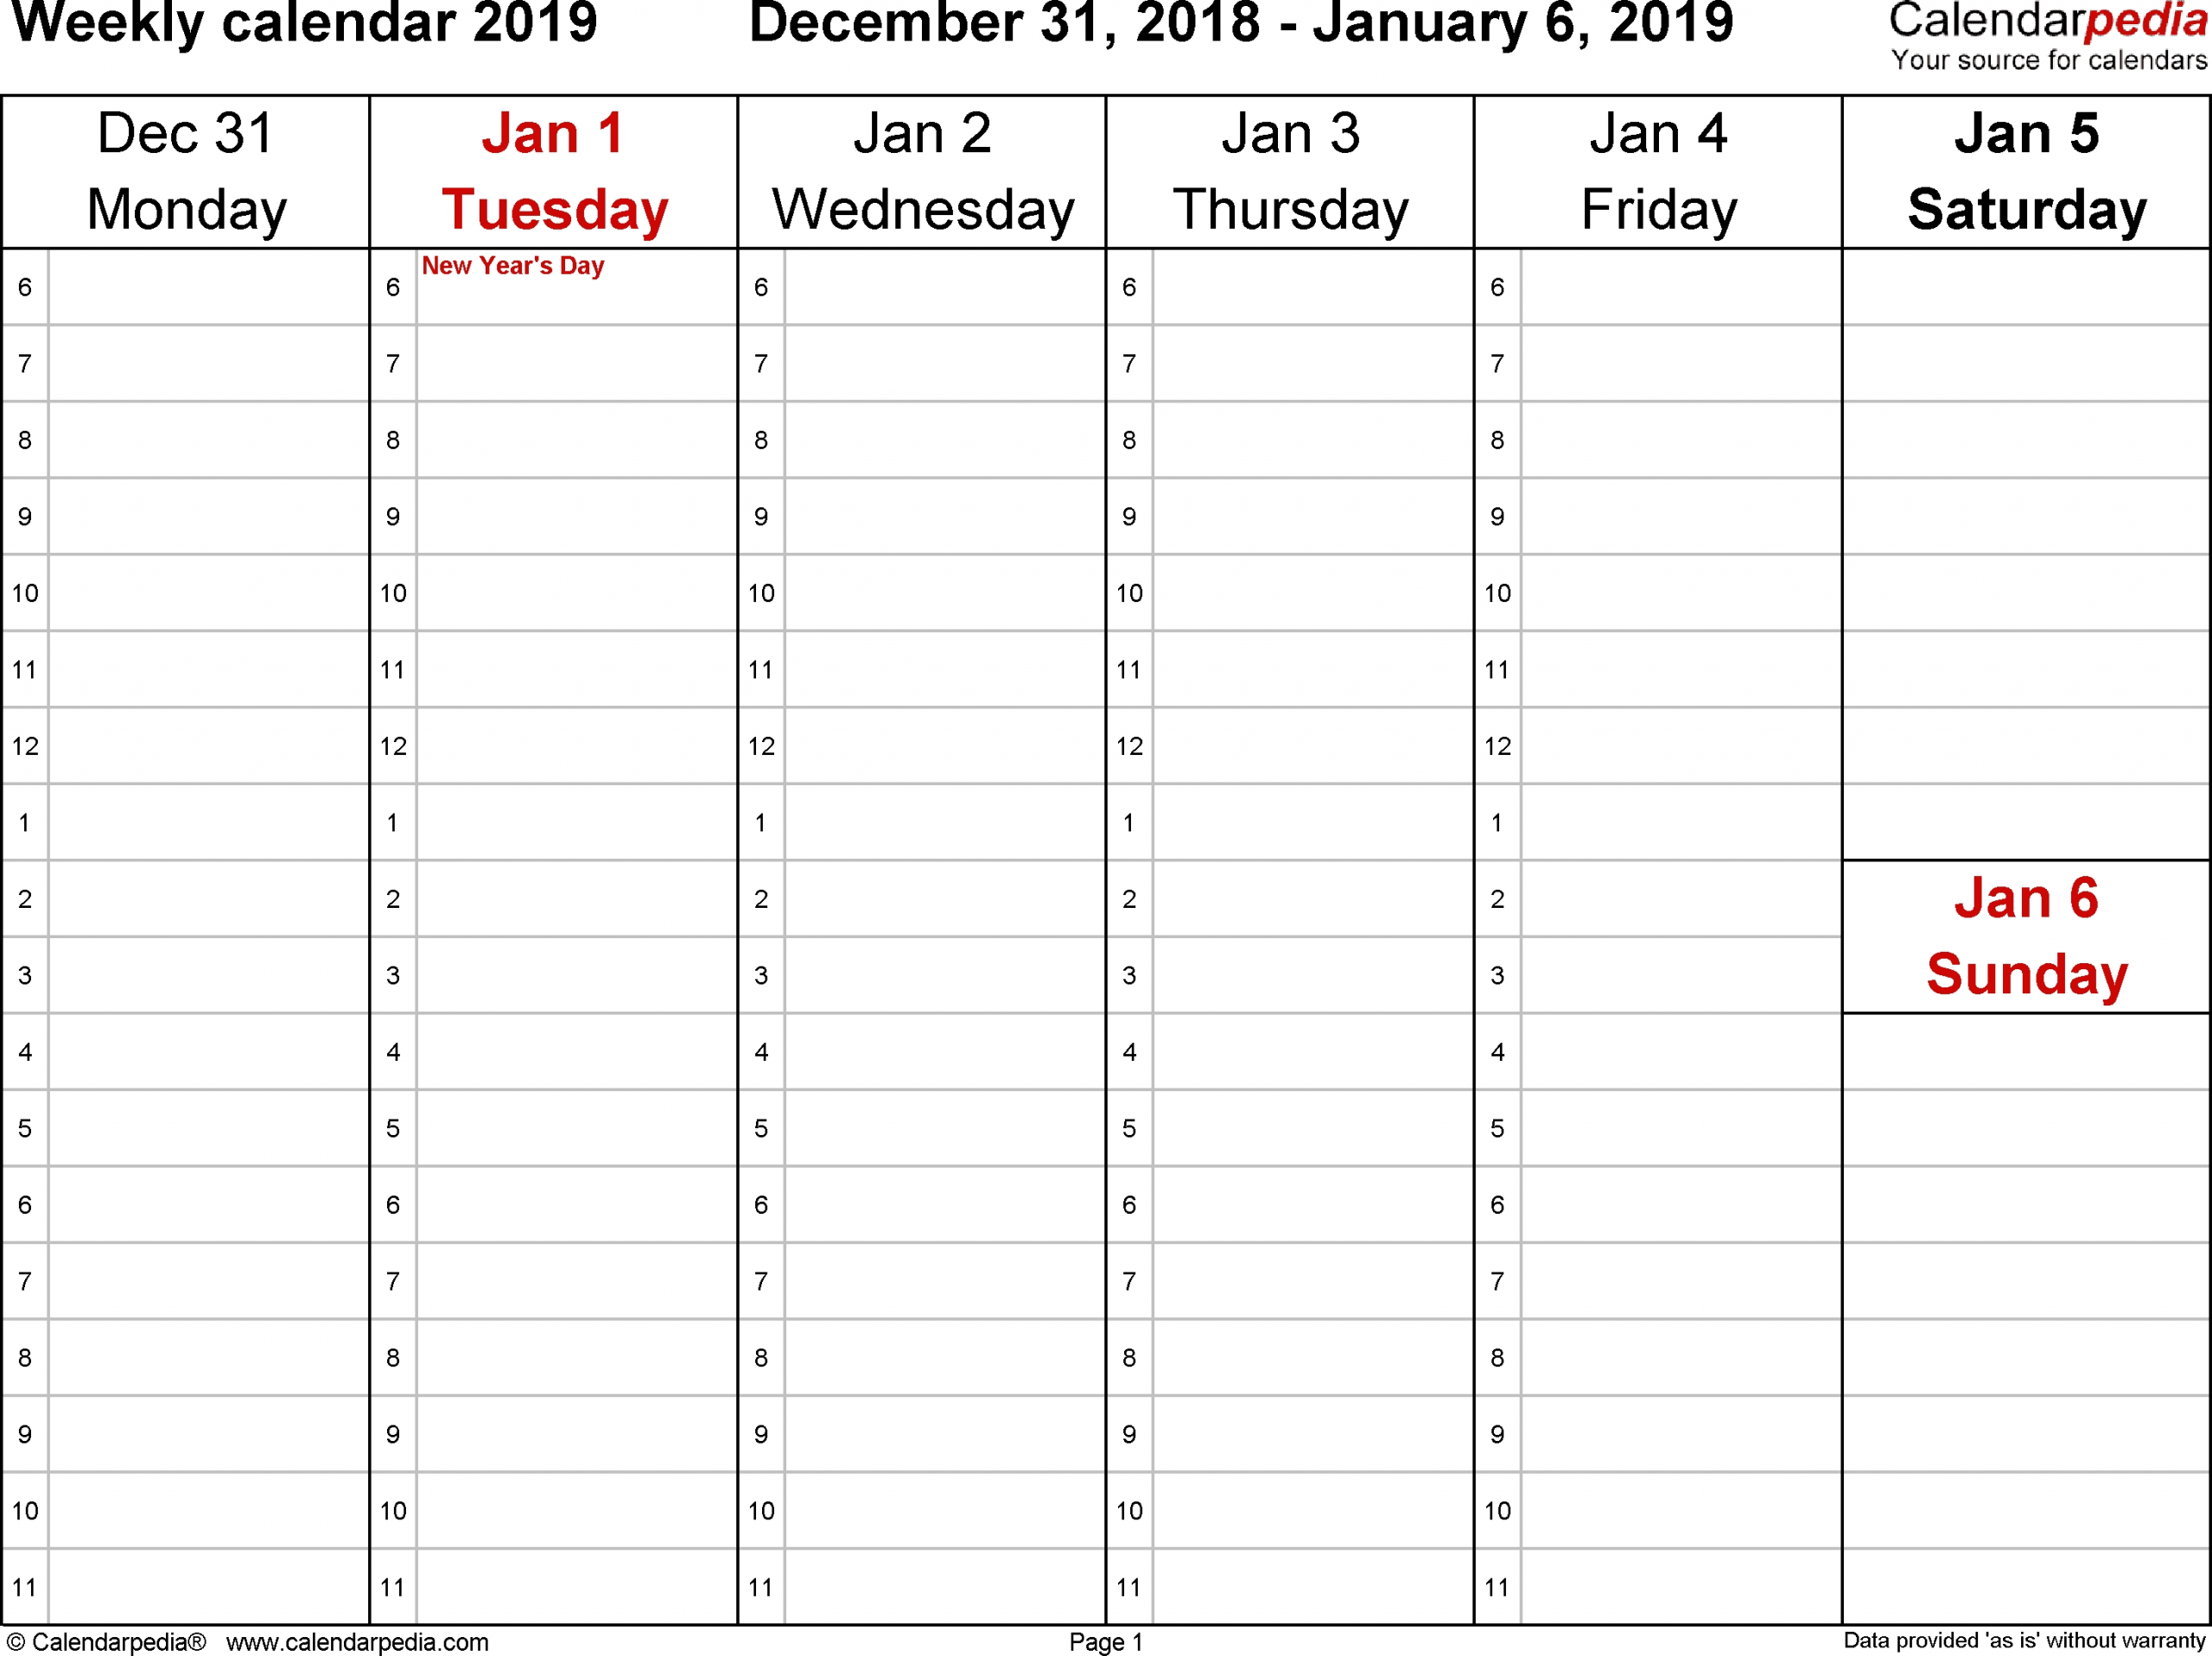 Weekly Calendar 2019 For Word - 12 Free Printable Templates intended for Weekly Calandar Template Starting Monday